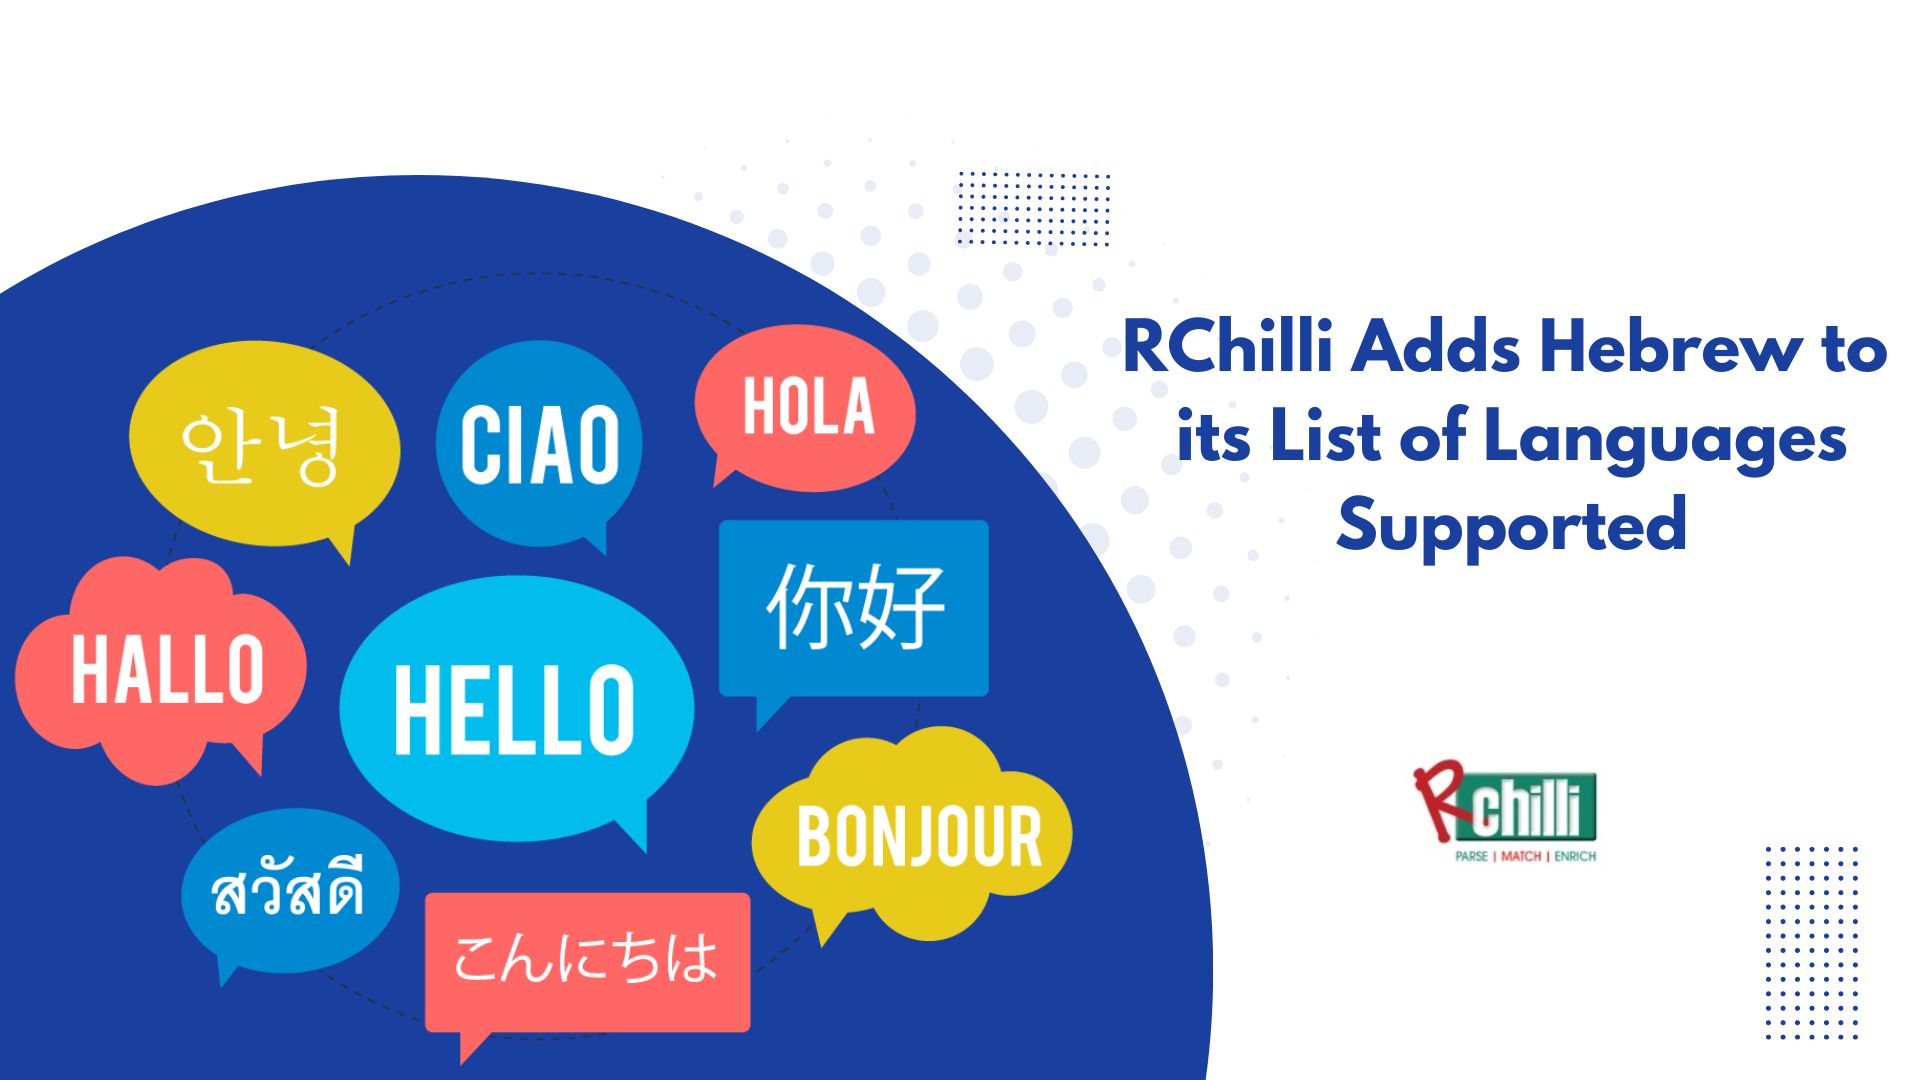 RChilli Adds Hebrew to its List of Supported Languages